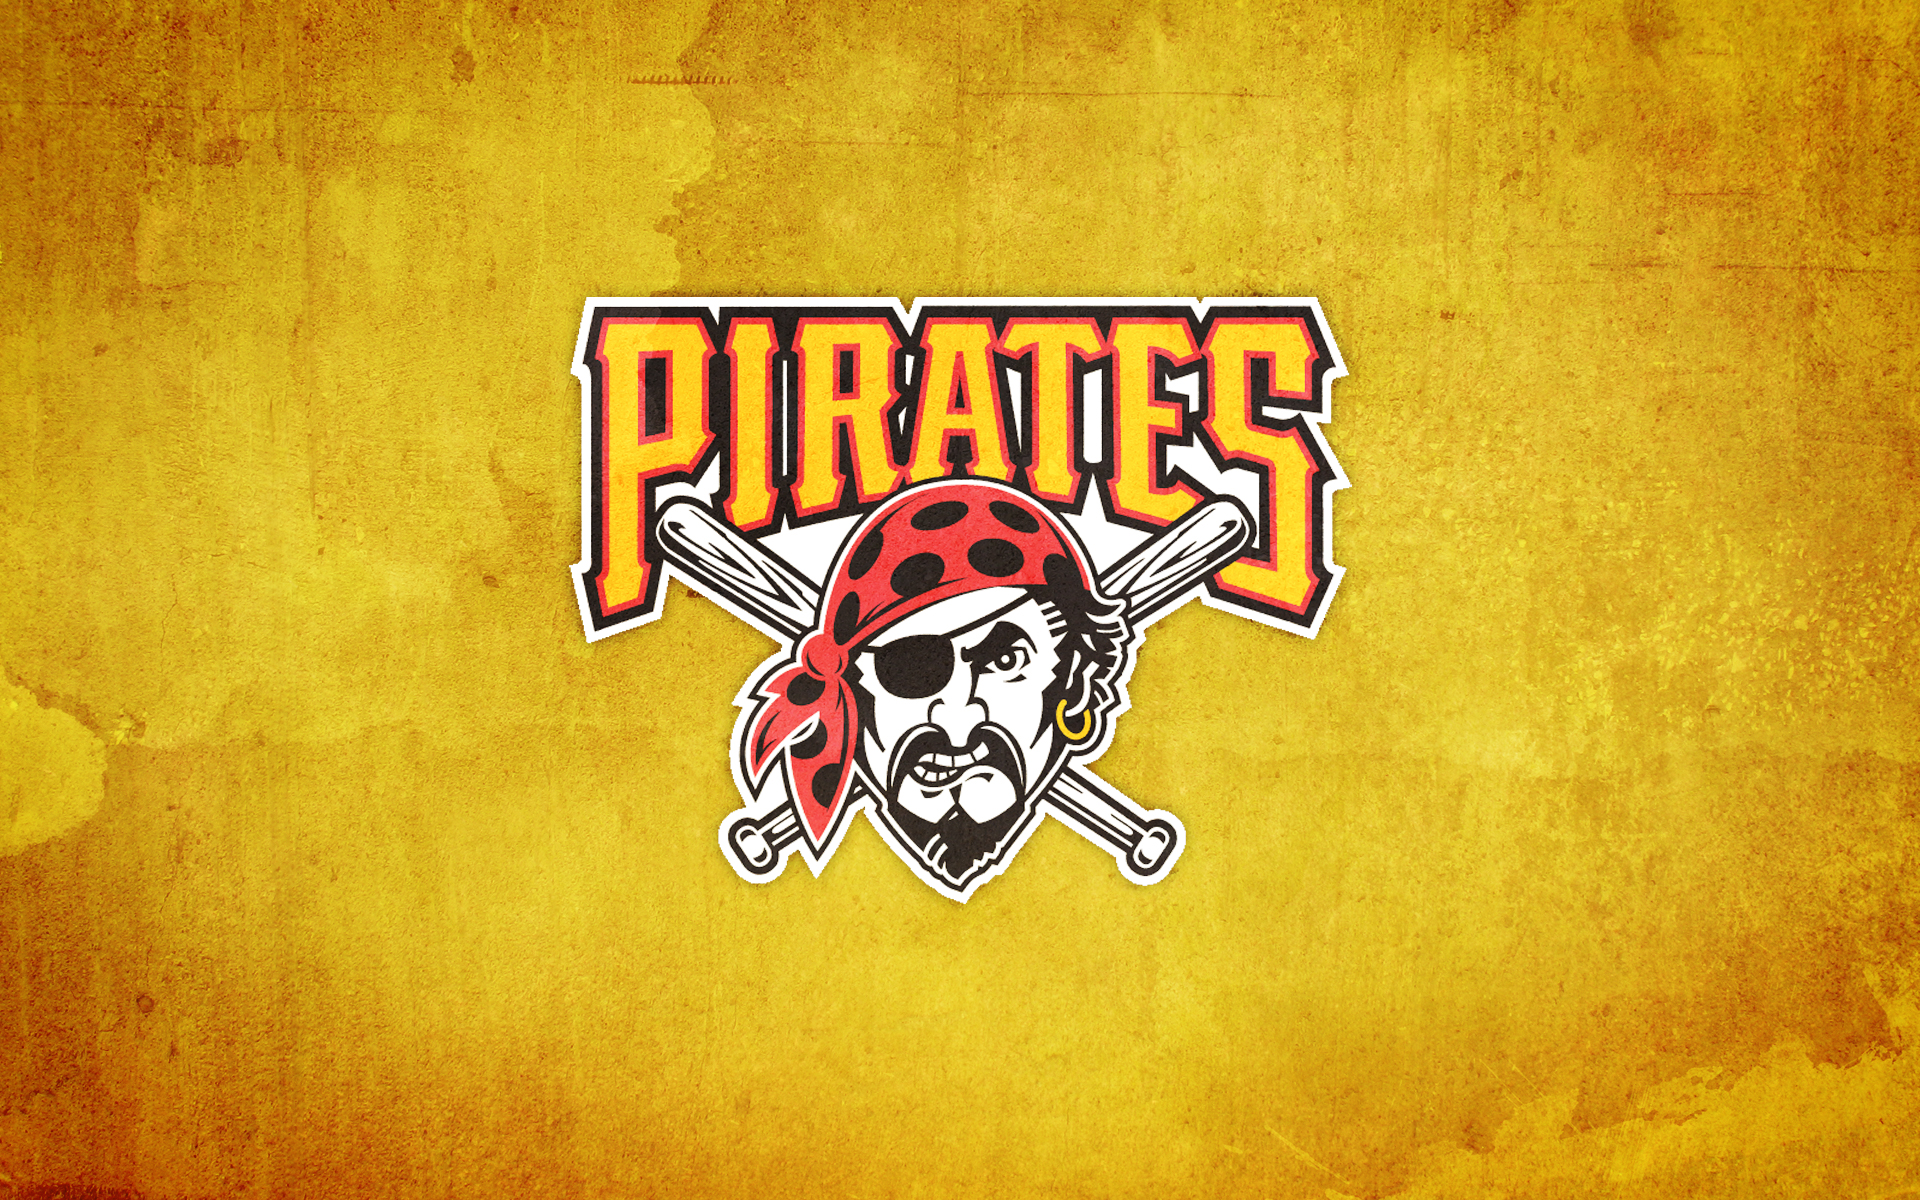 pittsburgh pirates iphone wallpaper,text,yellow,games,skull,font